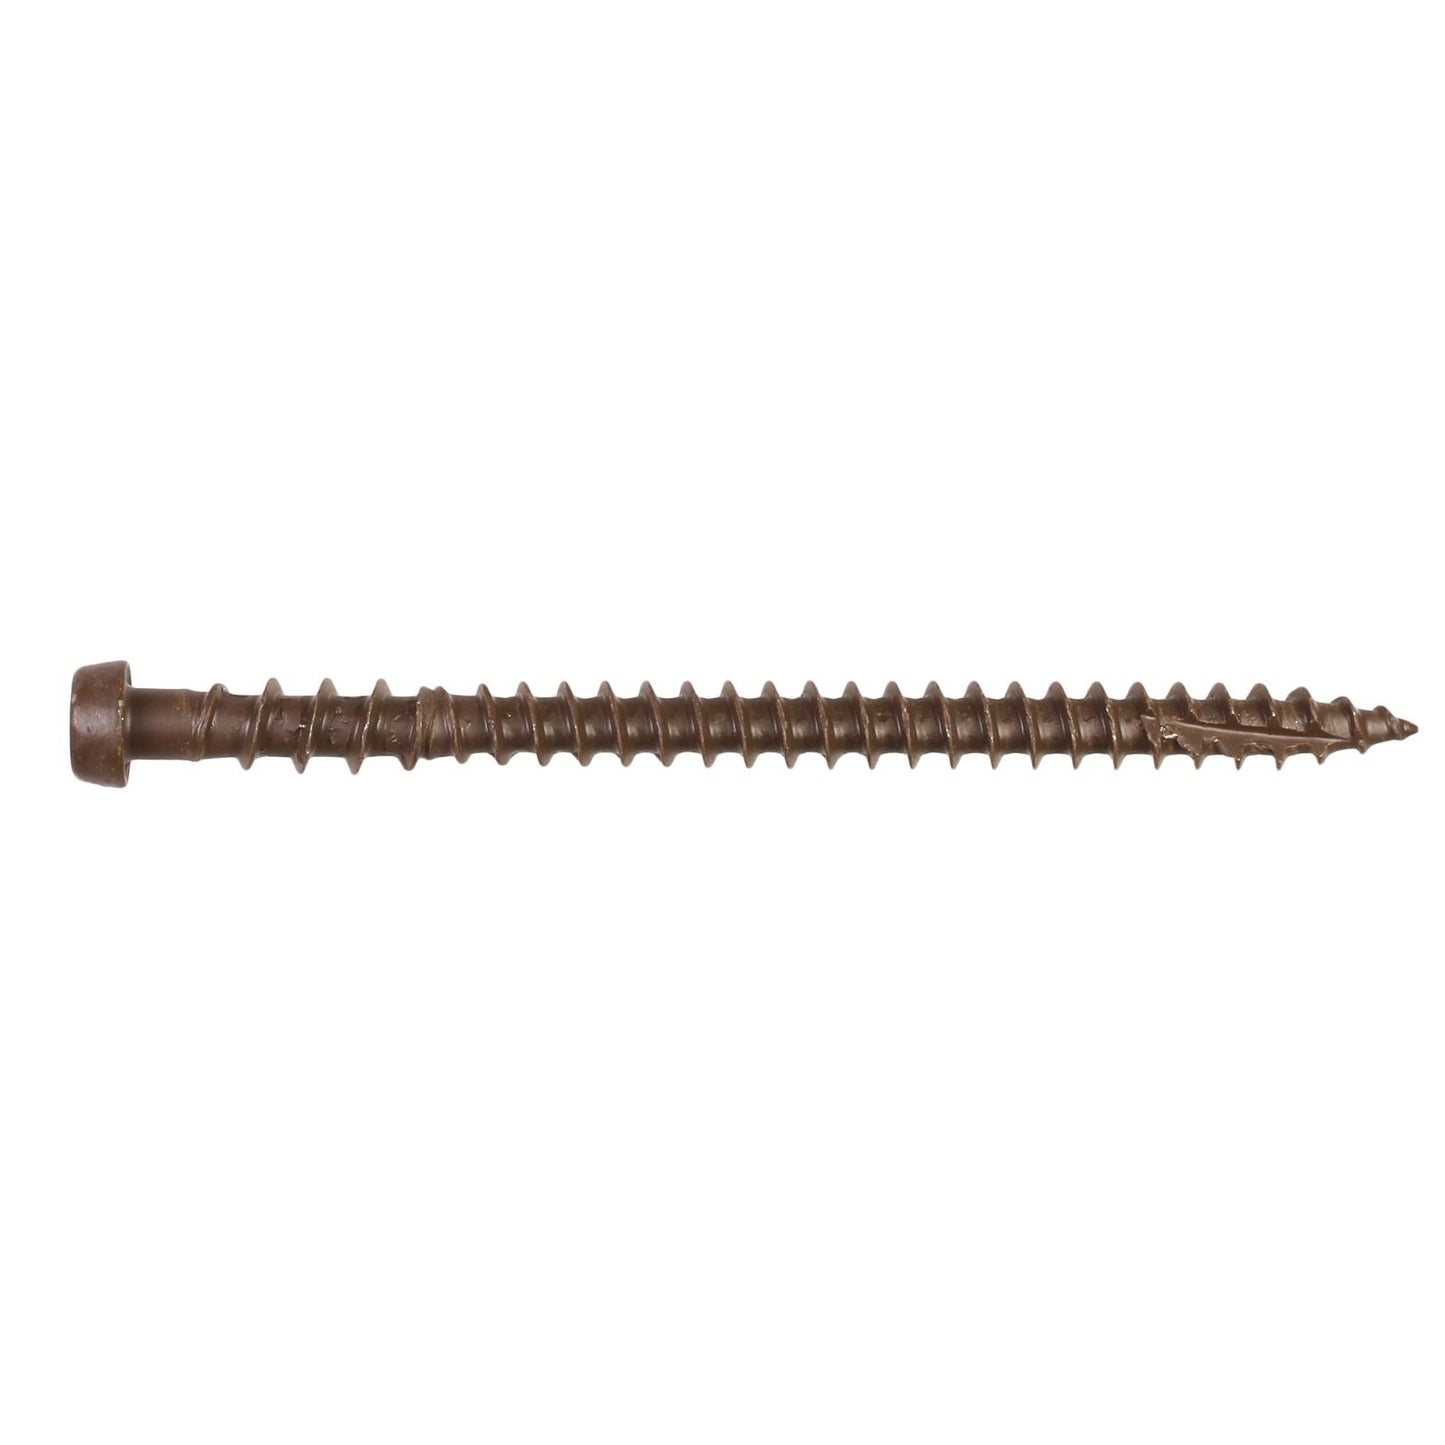 #10 x 234 inch Quik Drive DCU Composite Decking Screw Red01 Pkg 1000 image 1 of 2